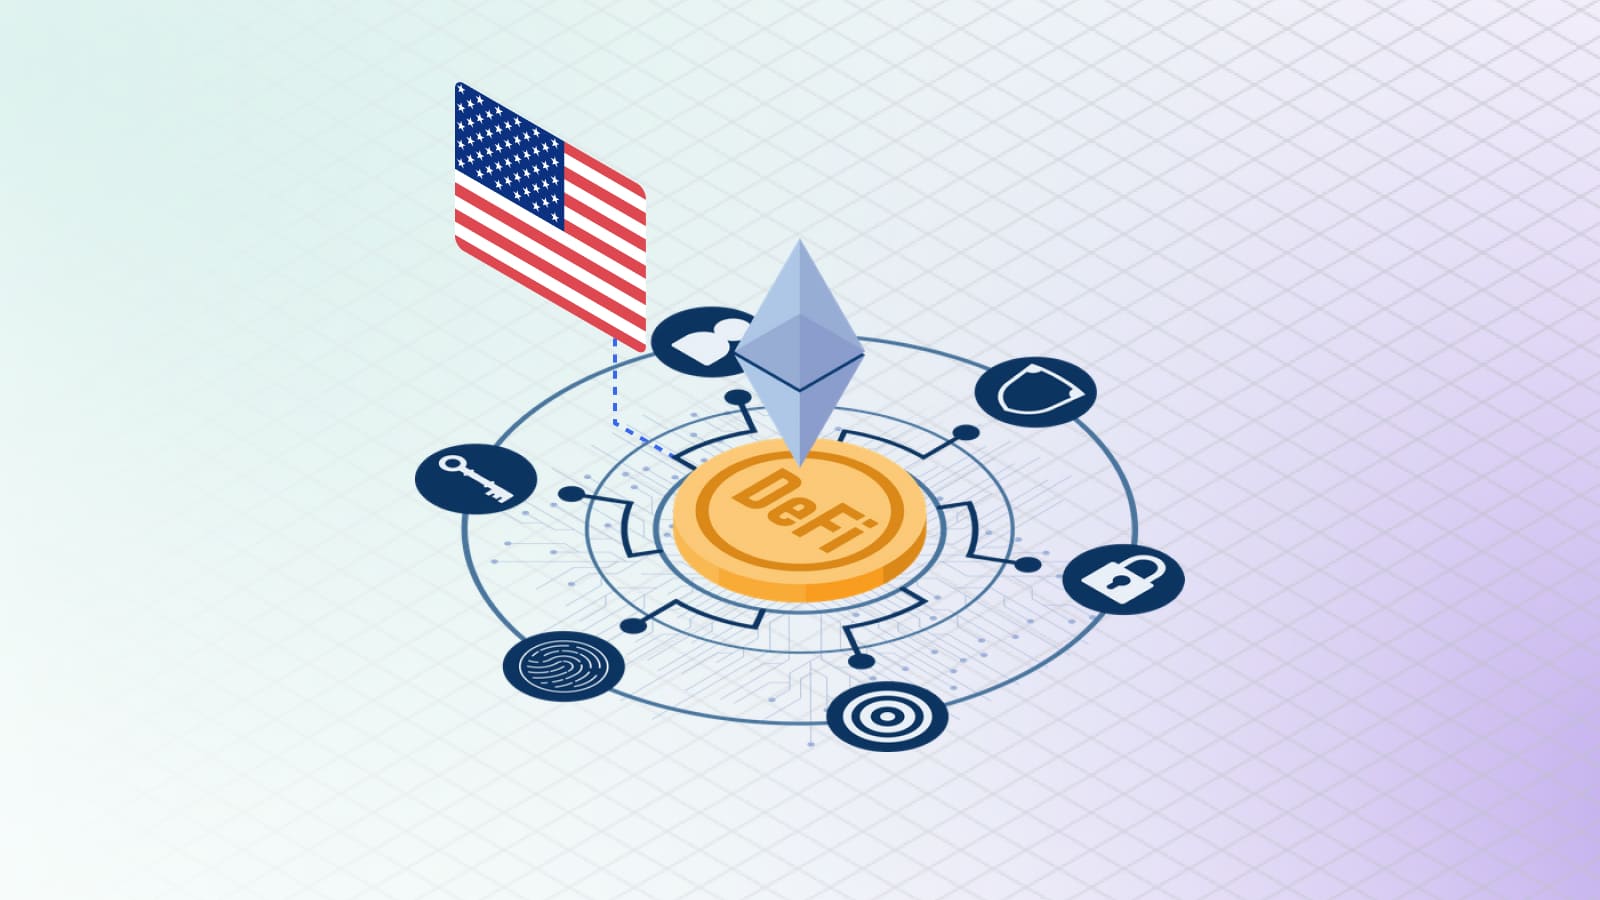 The development of the DeFi sector in the US has led to a decline in Bitcoin's dominance. 